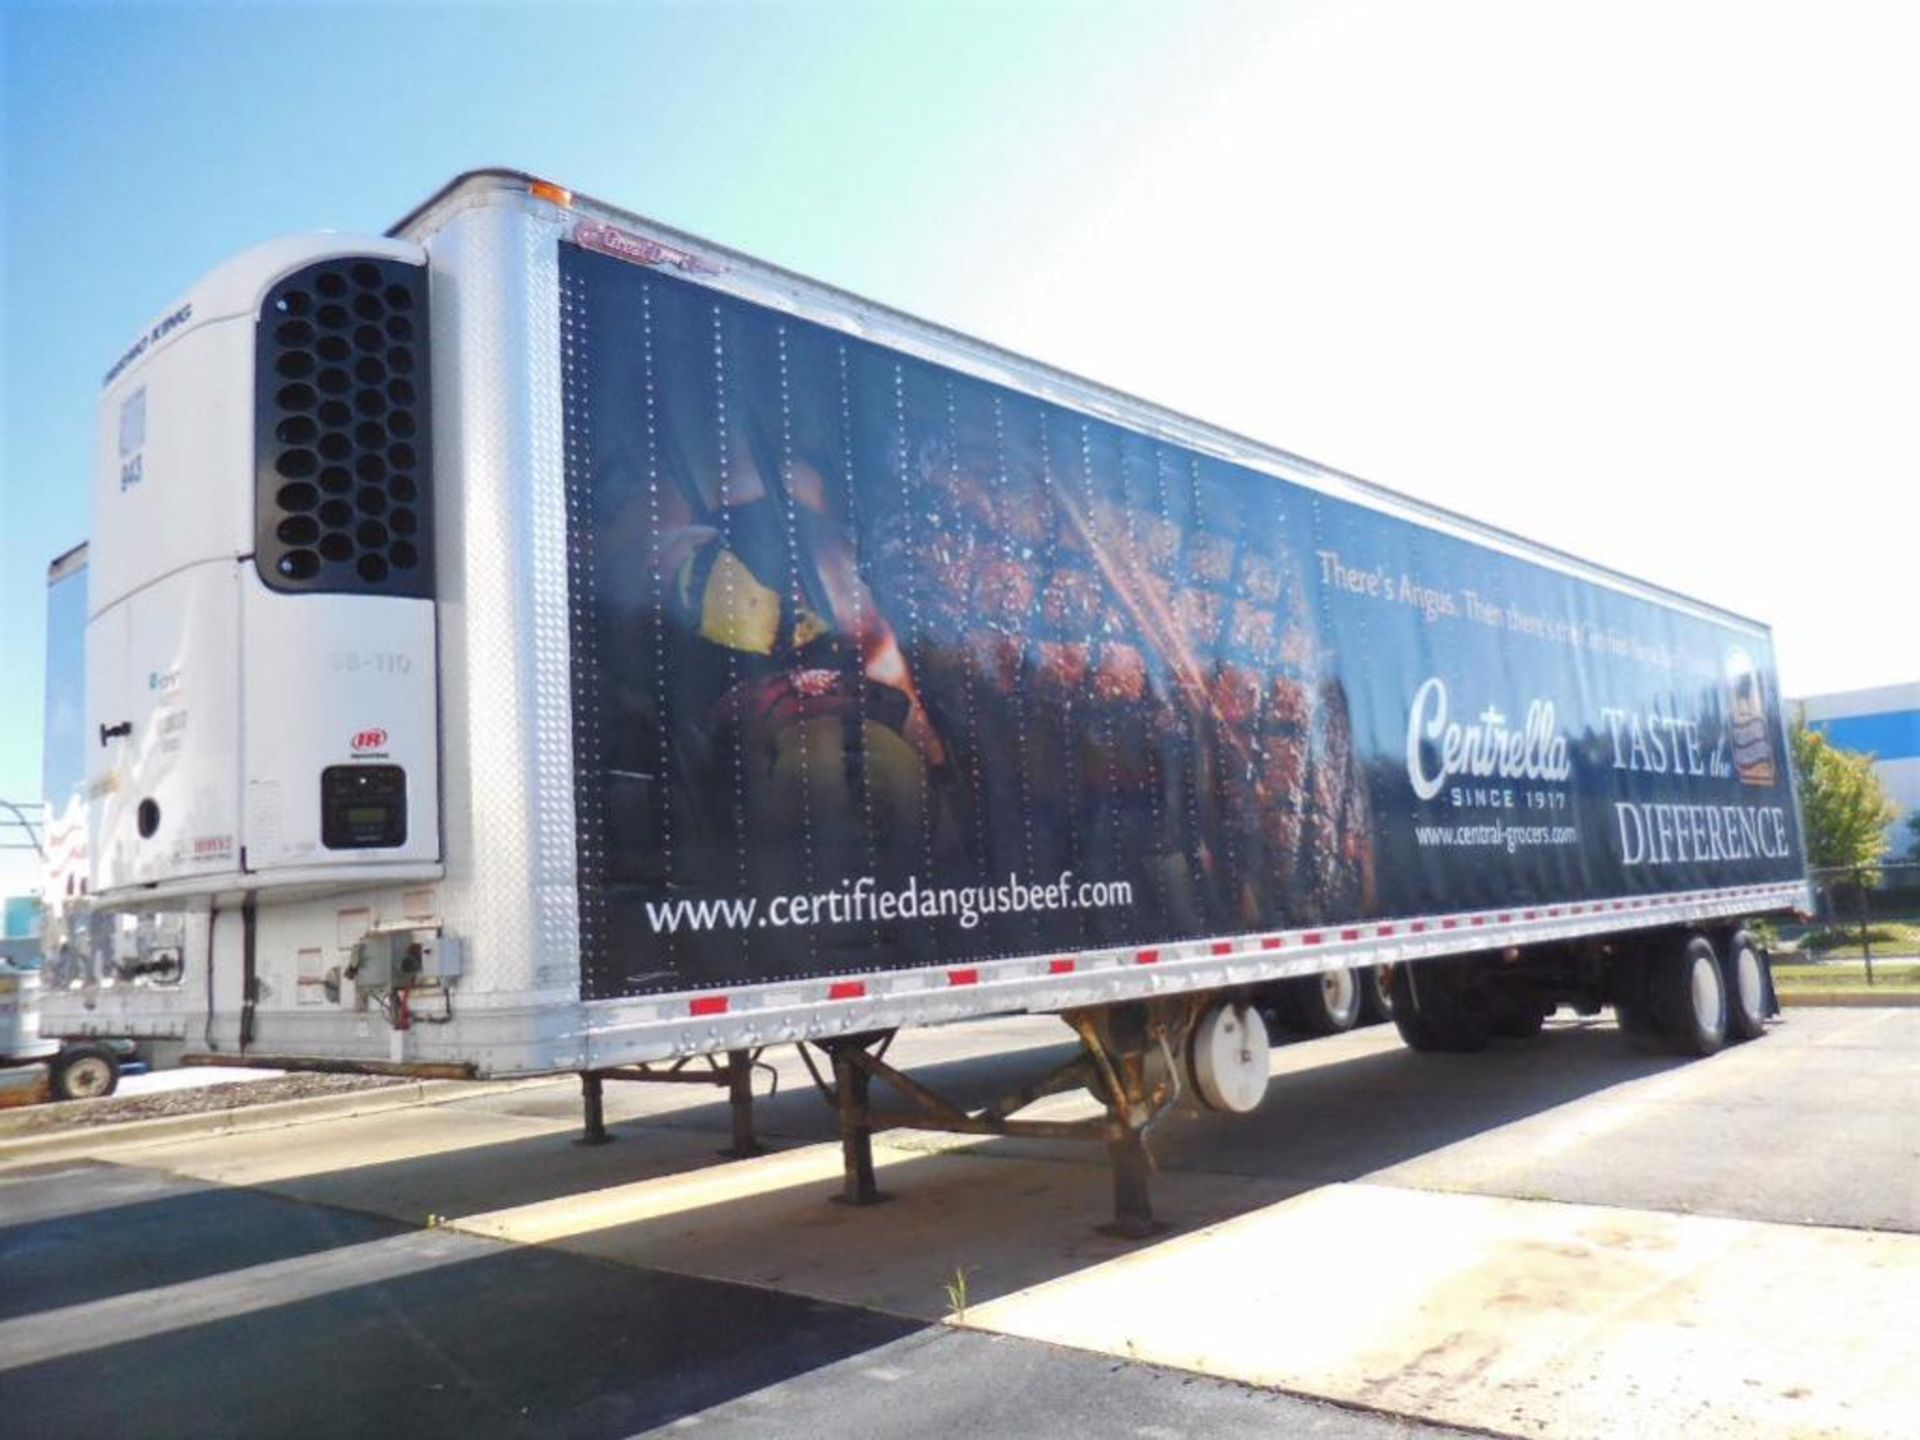 2009 Great Dane 48' Refrigerated Trailer, VIN # 1GRAA96249B702022, Unit 943 - Image 3 of 20